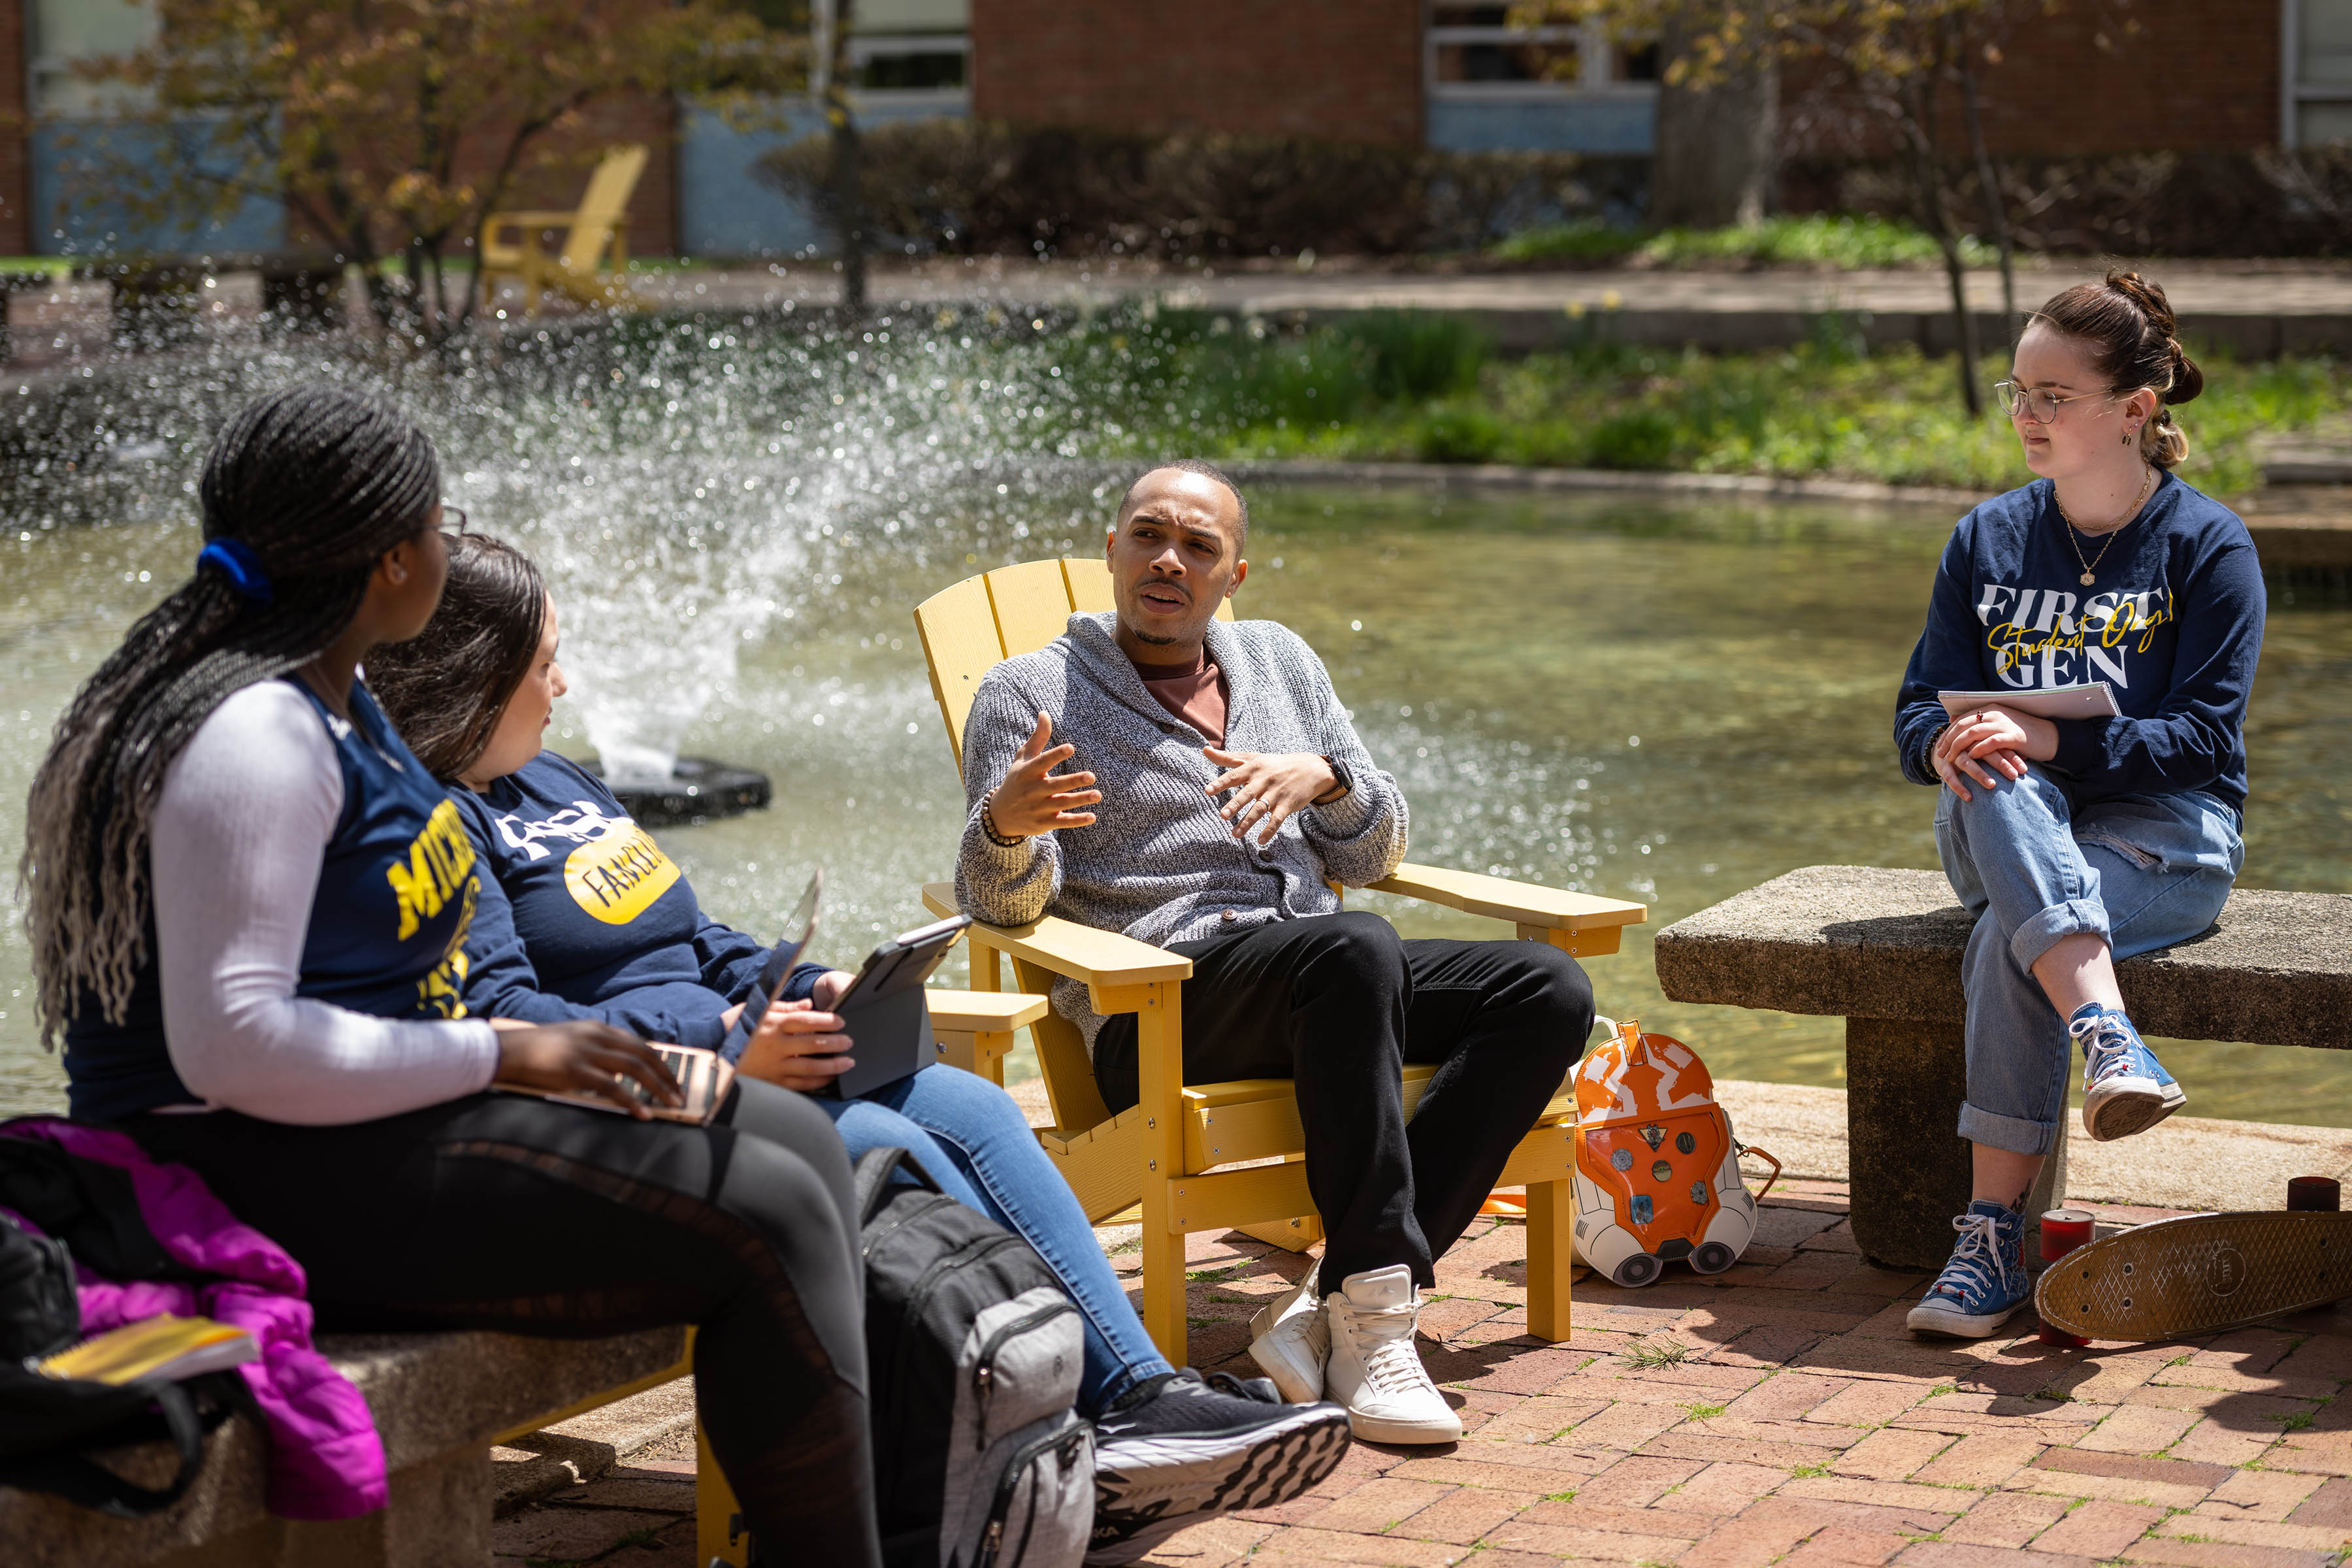 Alum Maurice Taylor sits and talks with students next to Chancellor's Pond with the fountain in the background.